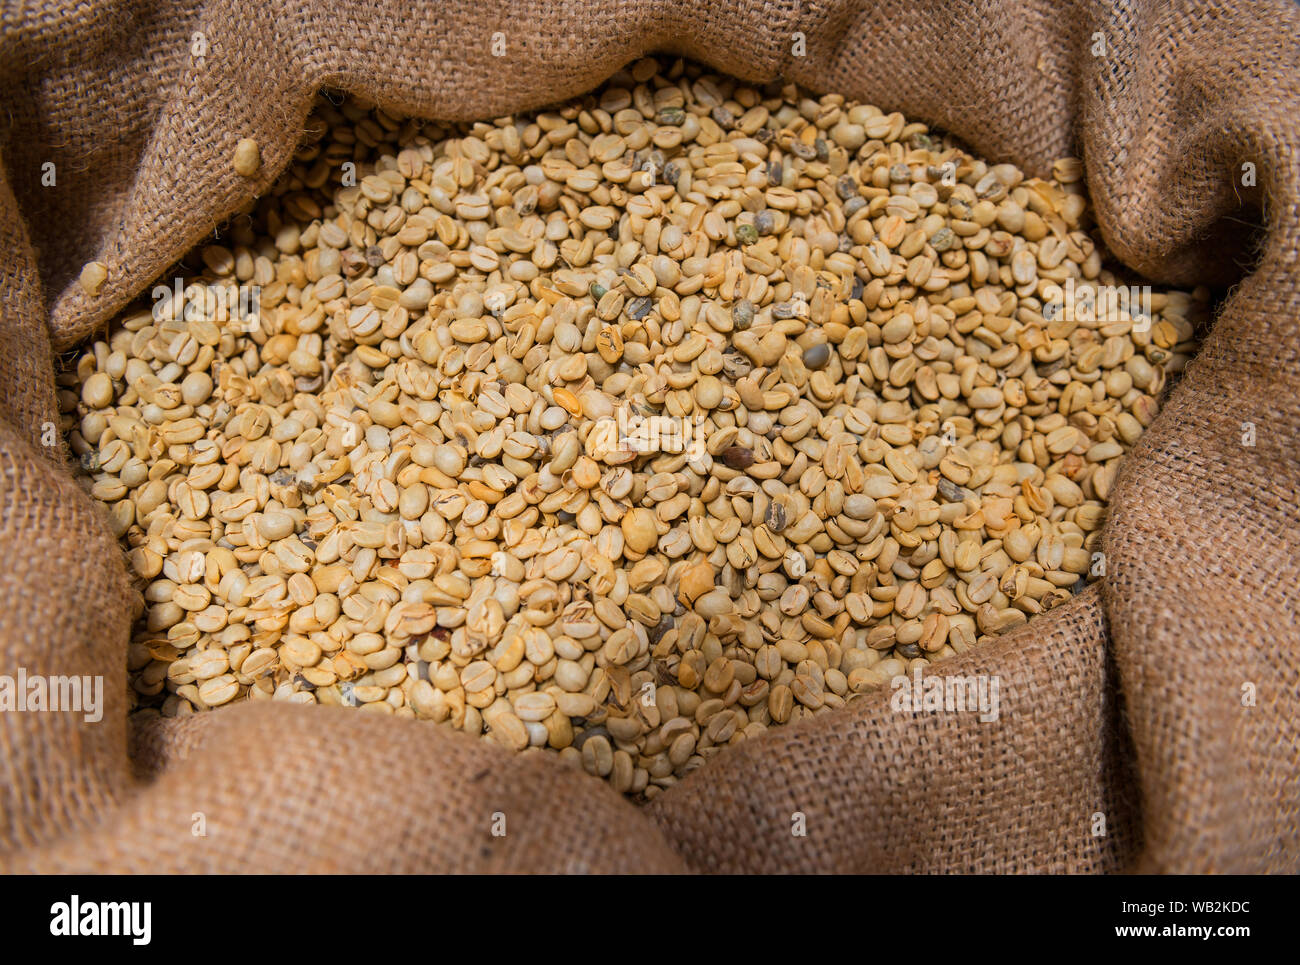 A burlap sack with unroasted high quality coffee beans in a coffee production estate near the Poas Volcano, San Jose, Costa Rica. Stock Photo